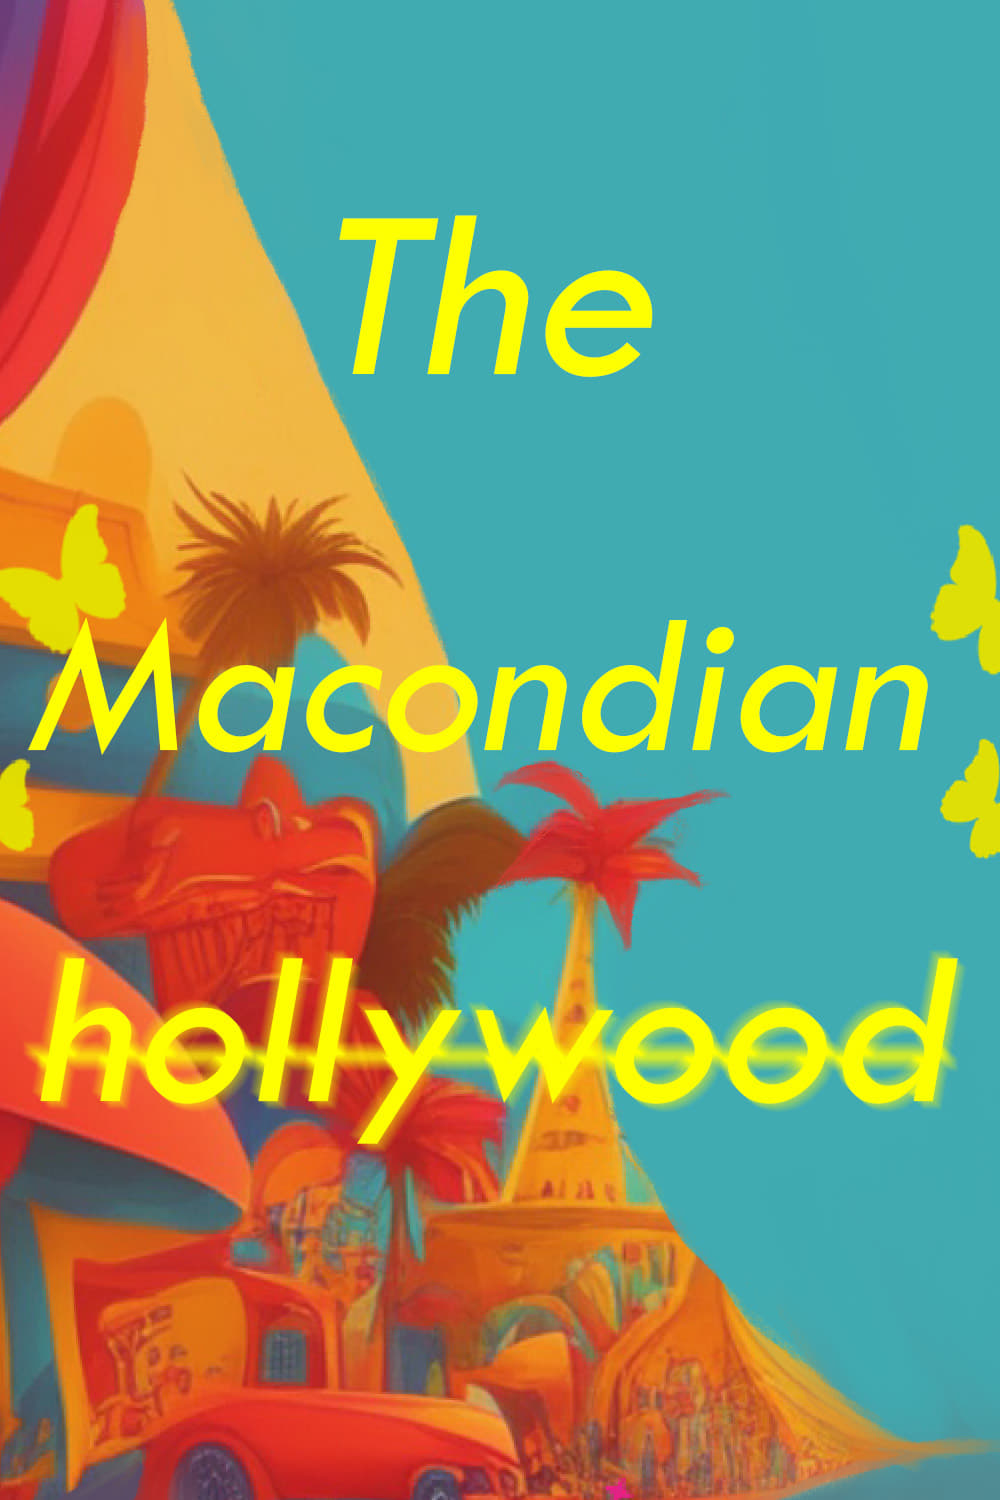 The Macondian Hollywood